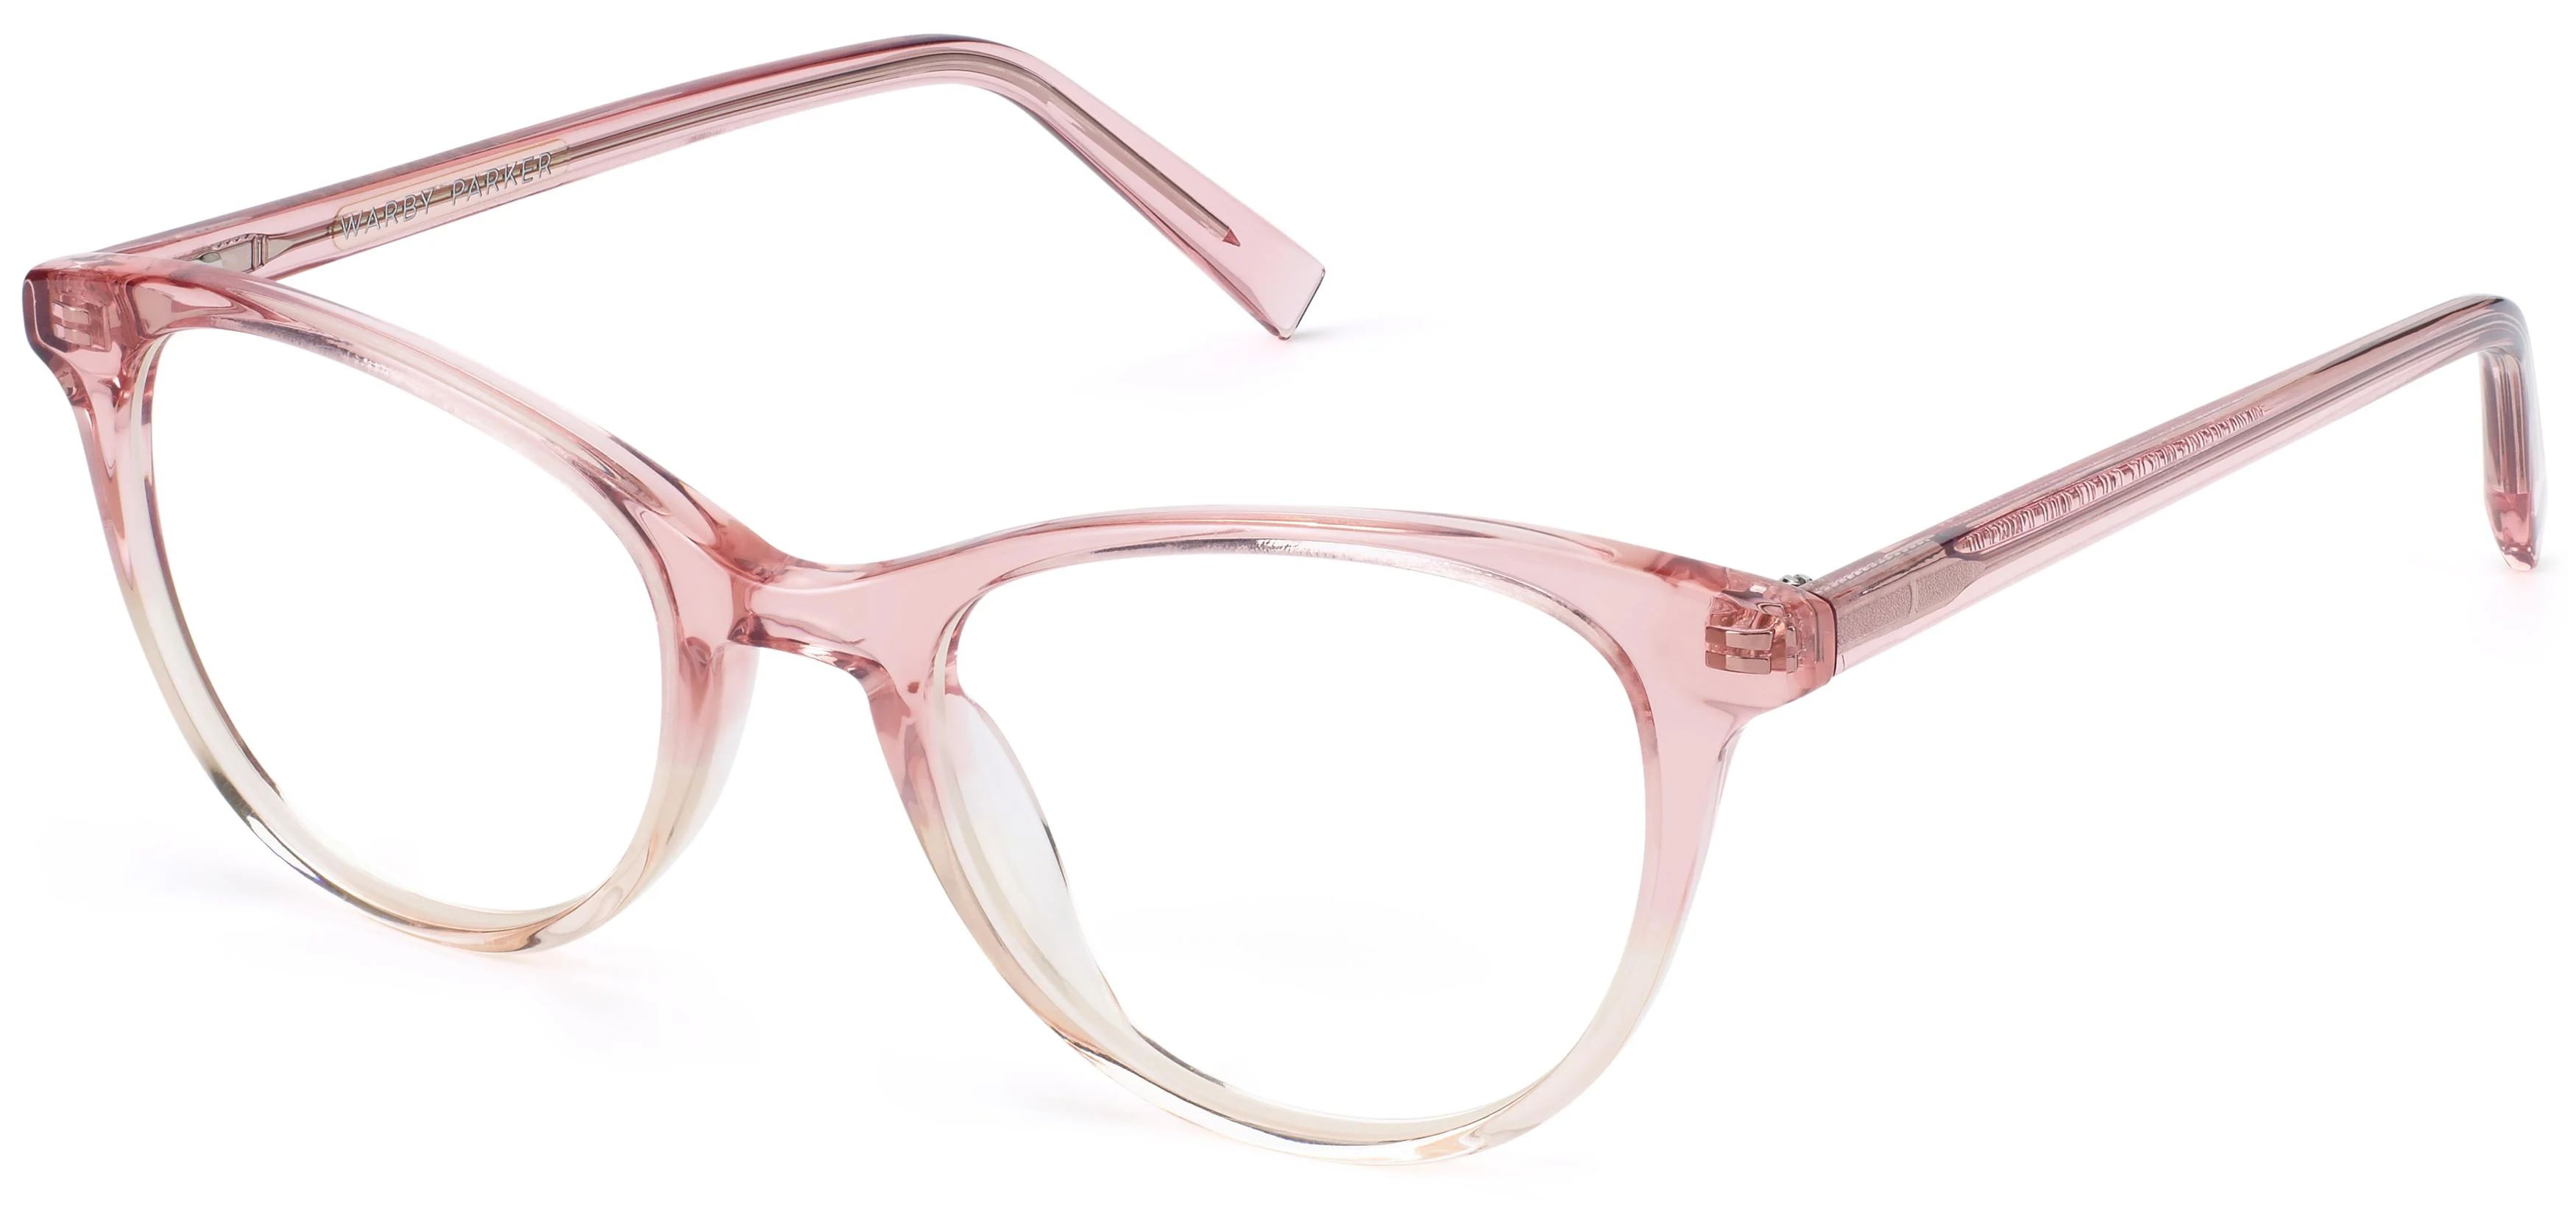 Rosie Eyeglasses in Mulberry Tortoise Fade | Warby Parker | Warby Parker (US)